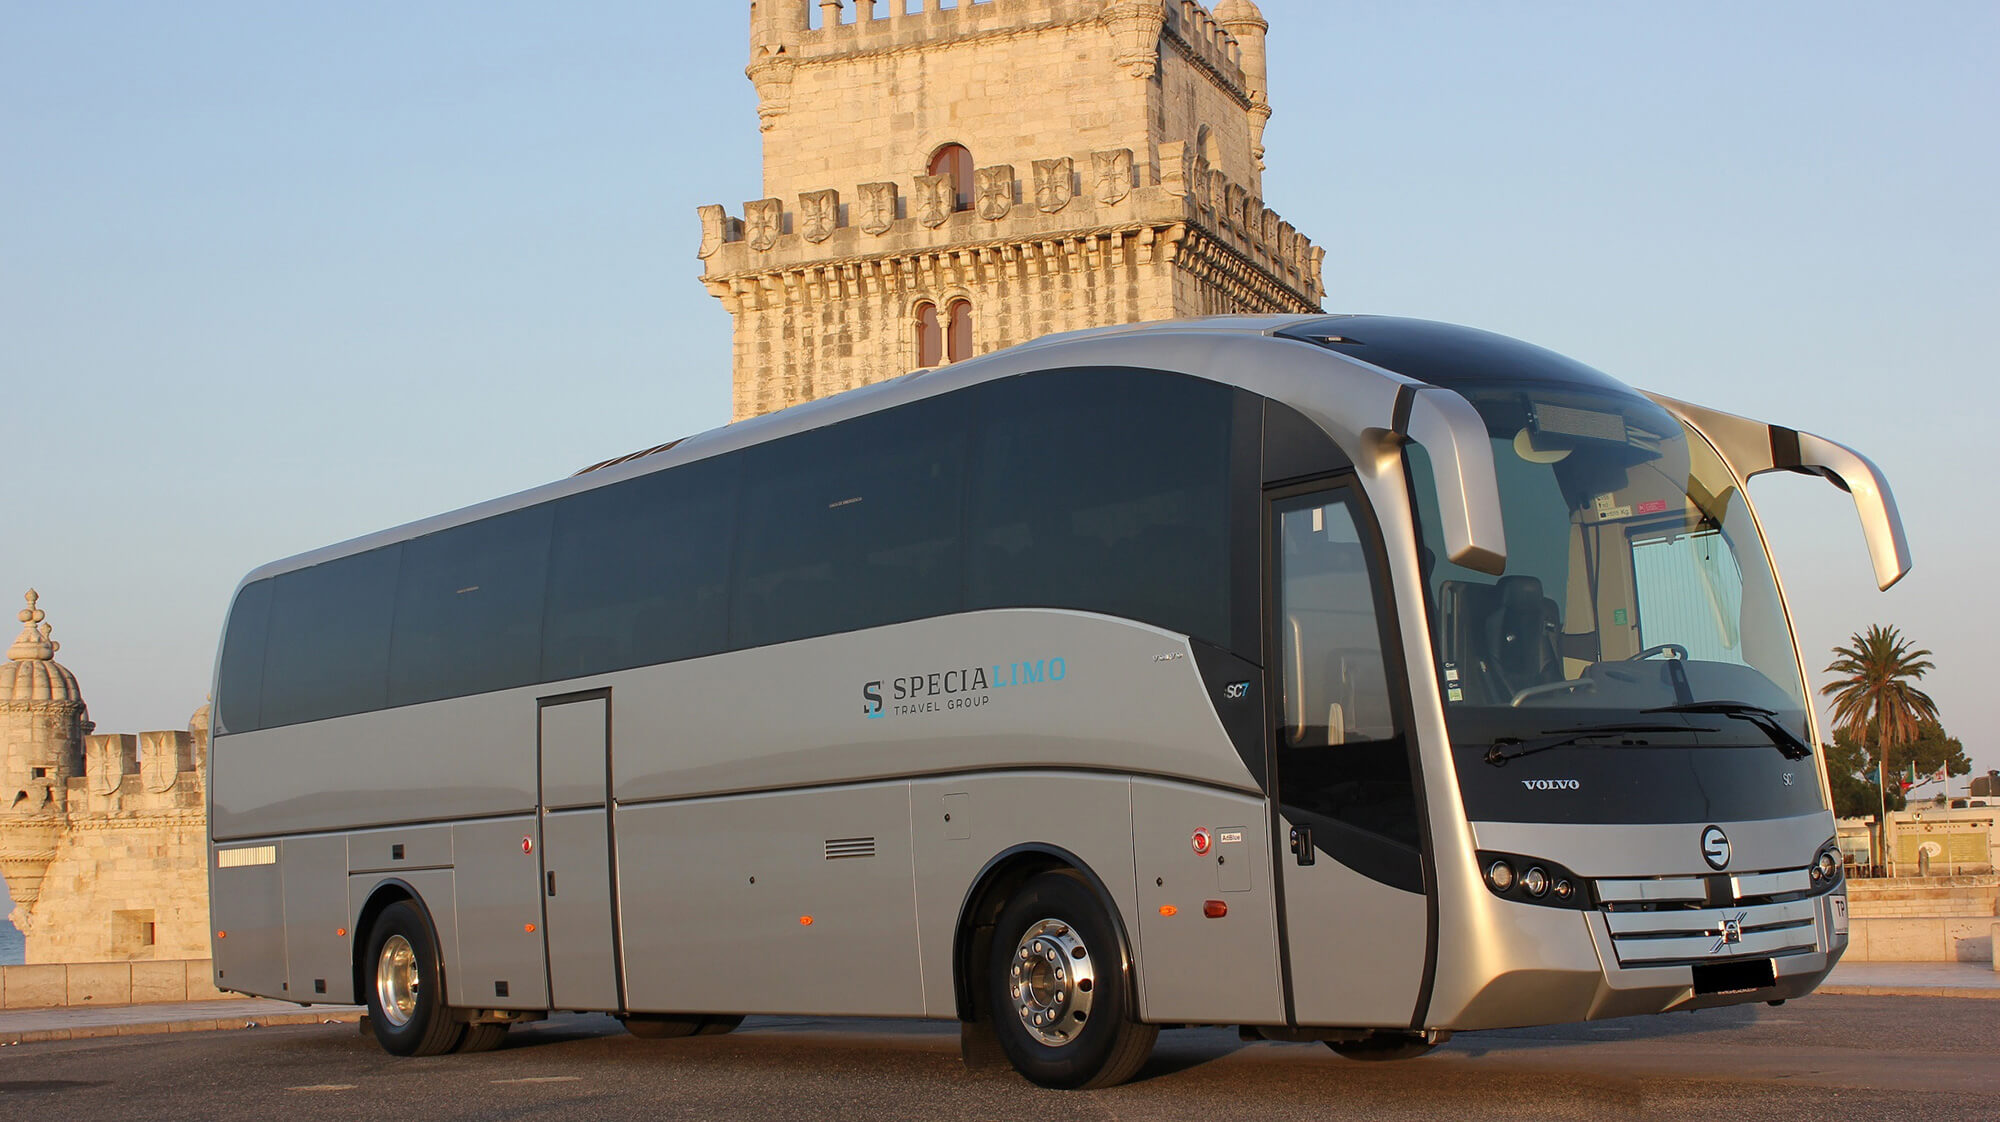 Hire a 53 seater Luxury VIP Coach (Mercedes Benz 2019) from SPECIALIMO TRAVEL GROUP in Almargem do Bispo, Sintra 